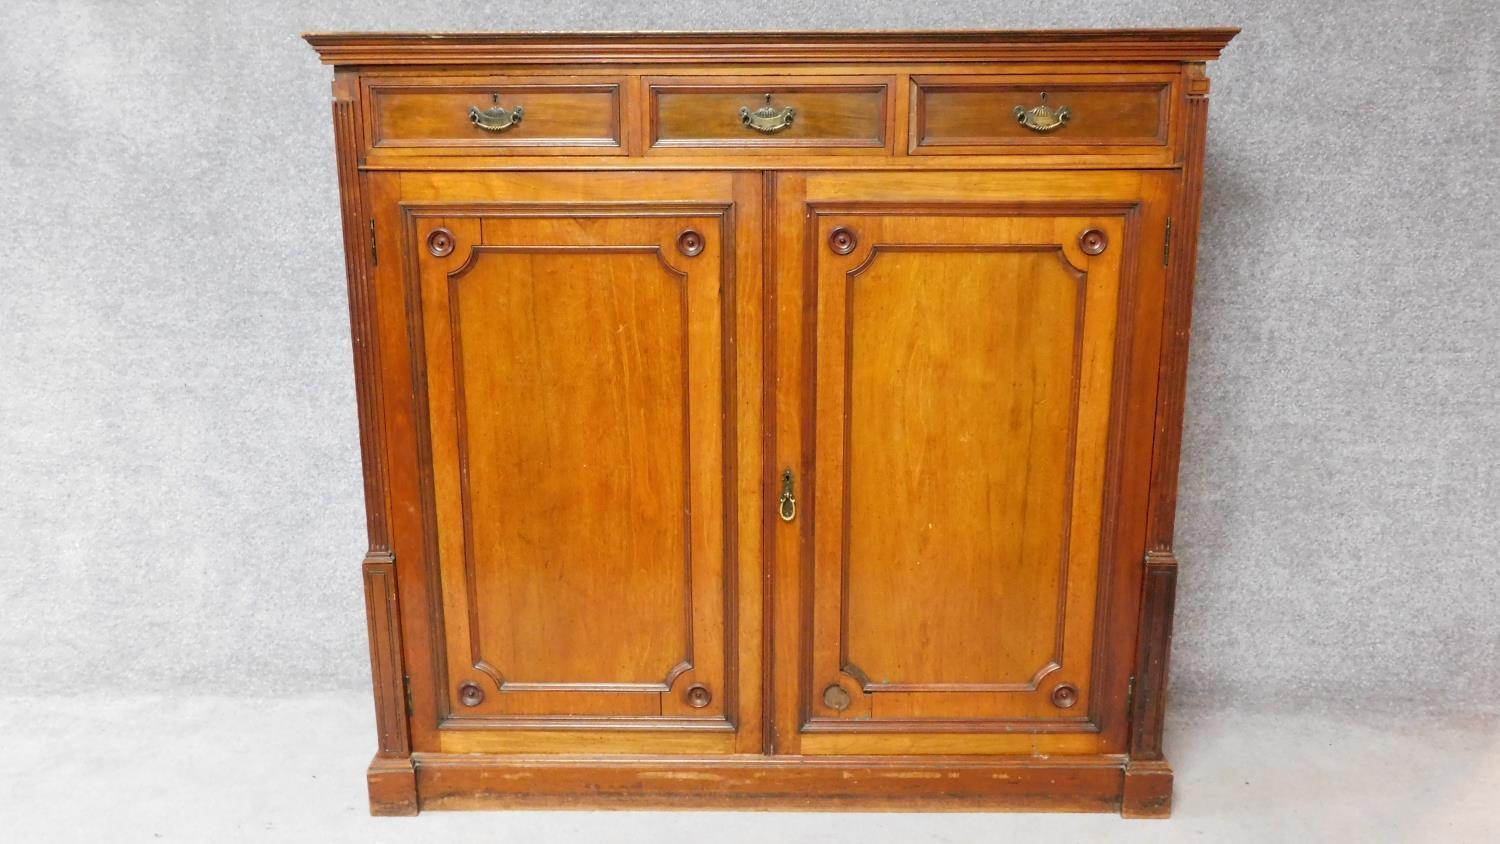 A 19th century mahogany press cupboard with three frieze drawers over panel doors enclosing linen